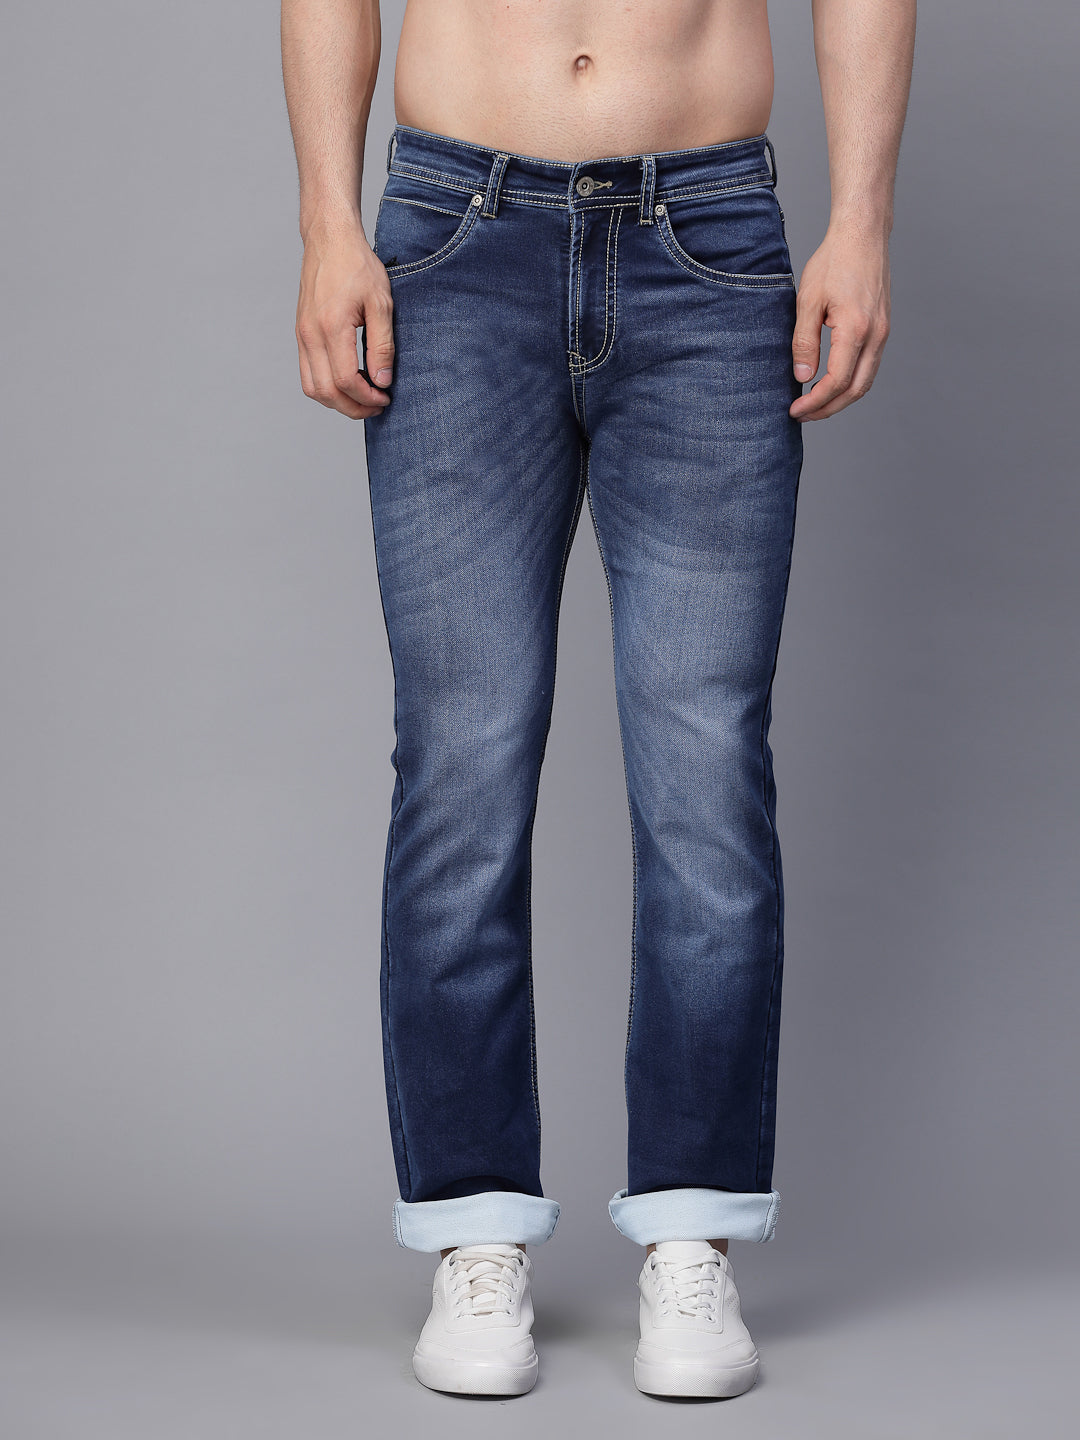 Mens Blue Cotton Solid Cuffing Full Length Jeans